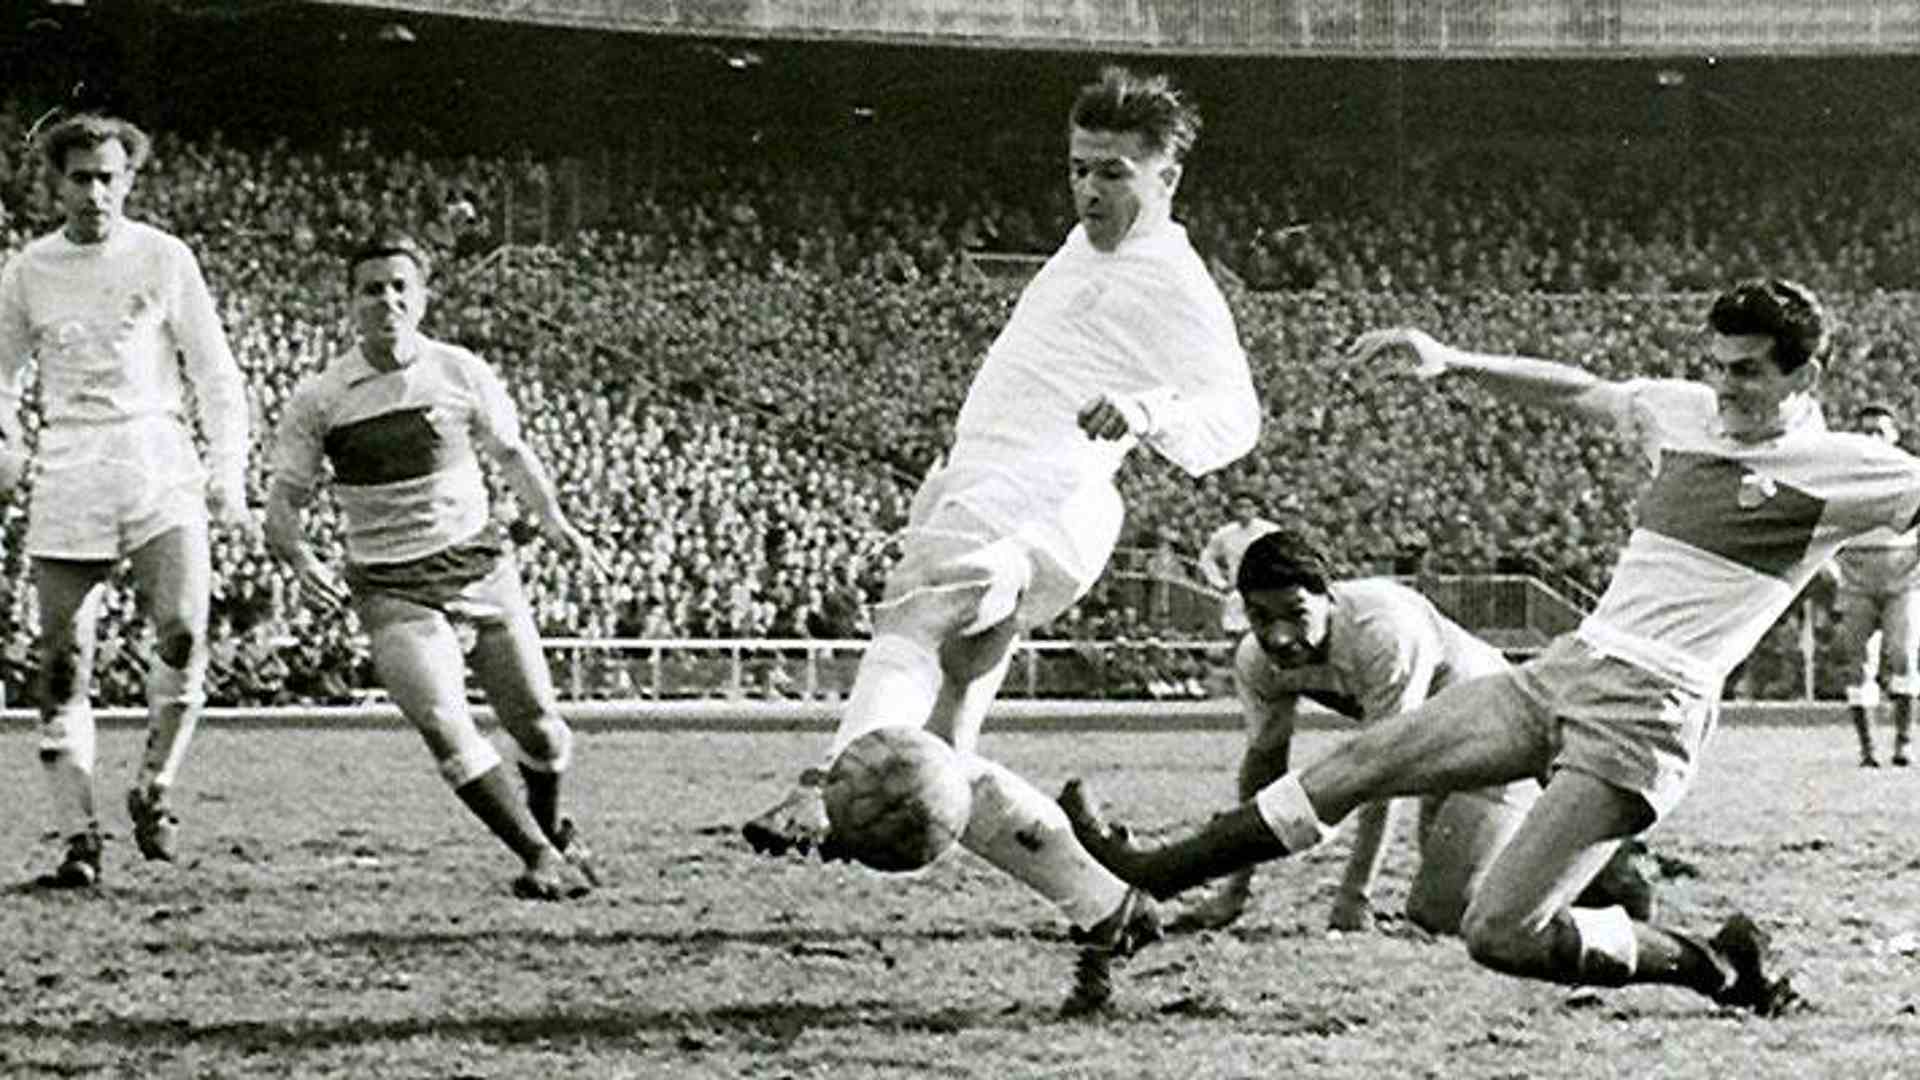 Ferenc Puskas for Real Madrid, Credit: Twitter/@realmadrid